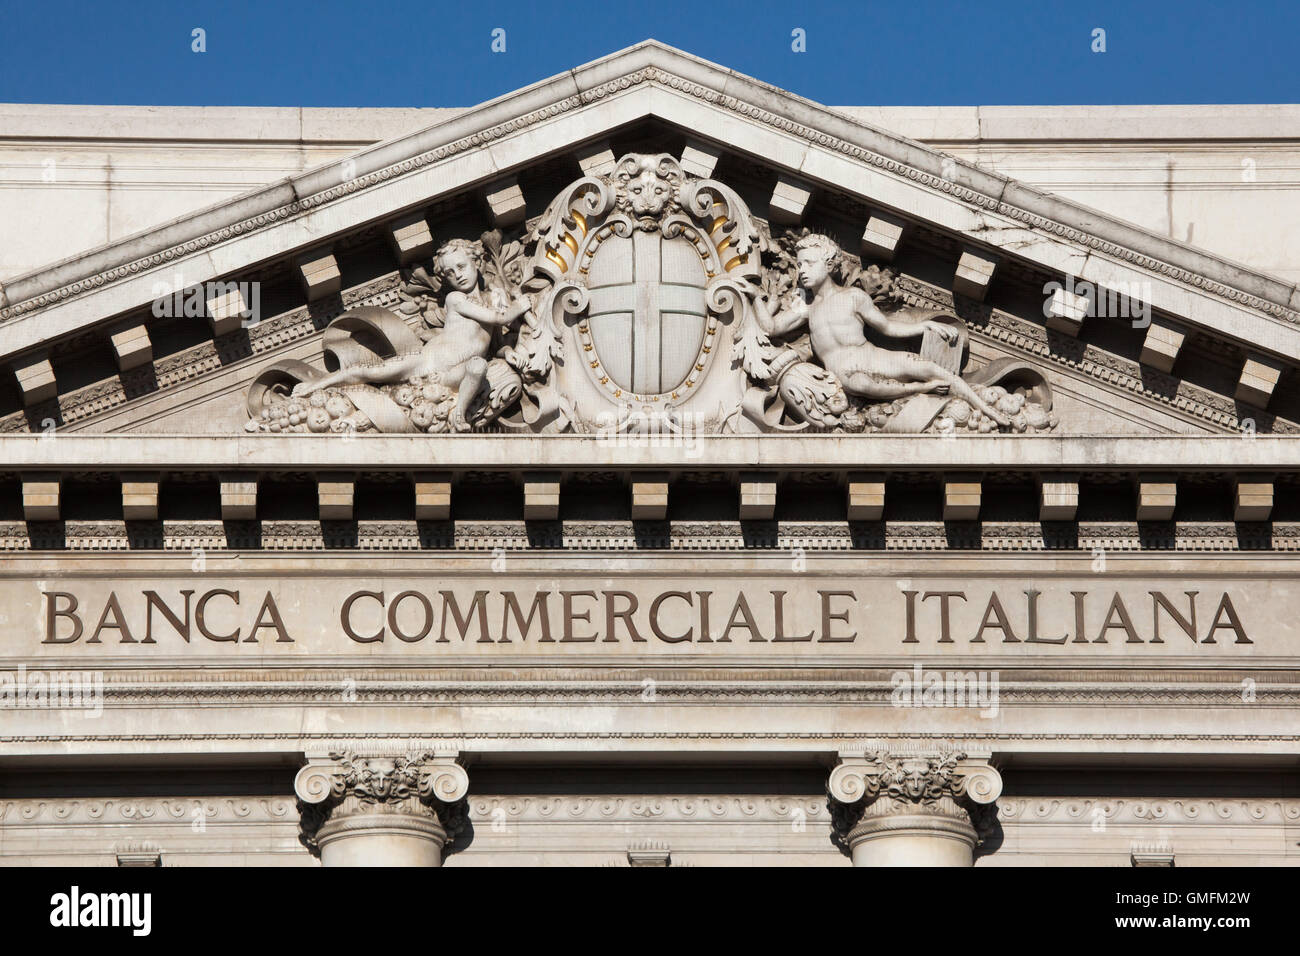 Coat of arms of Milan depicted in the tympanum of the Palace of the Banca Commerciale Italiana in Piazza della Scala in Milan, Lombardy, Italy. The Palace of the Banca Commerciale Italiana designed by Italian architect Luca Beltrami was built in the early 20th century. Stock Photo